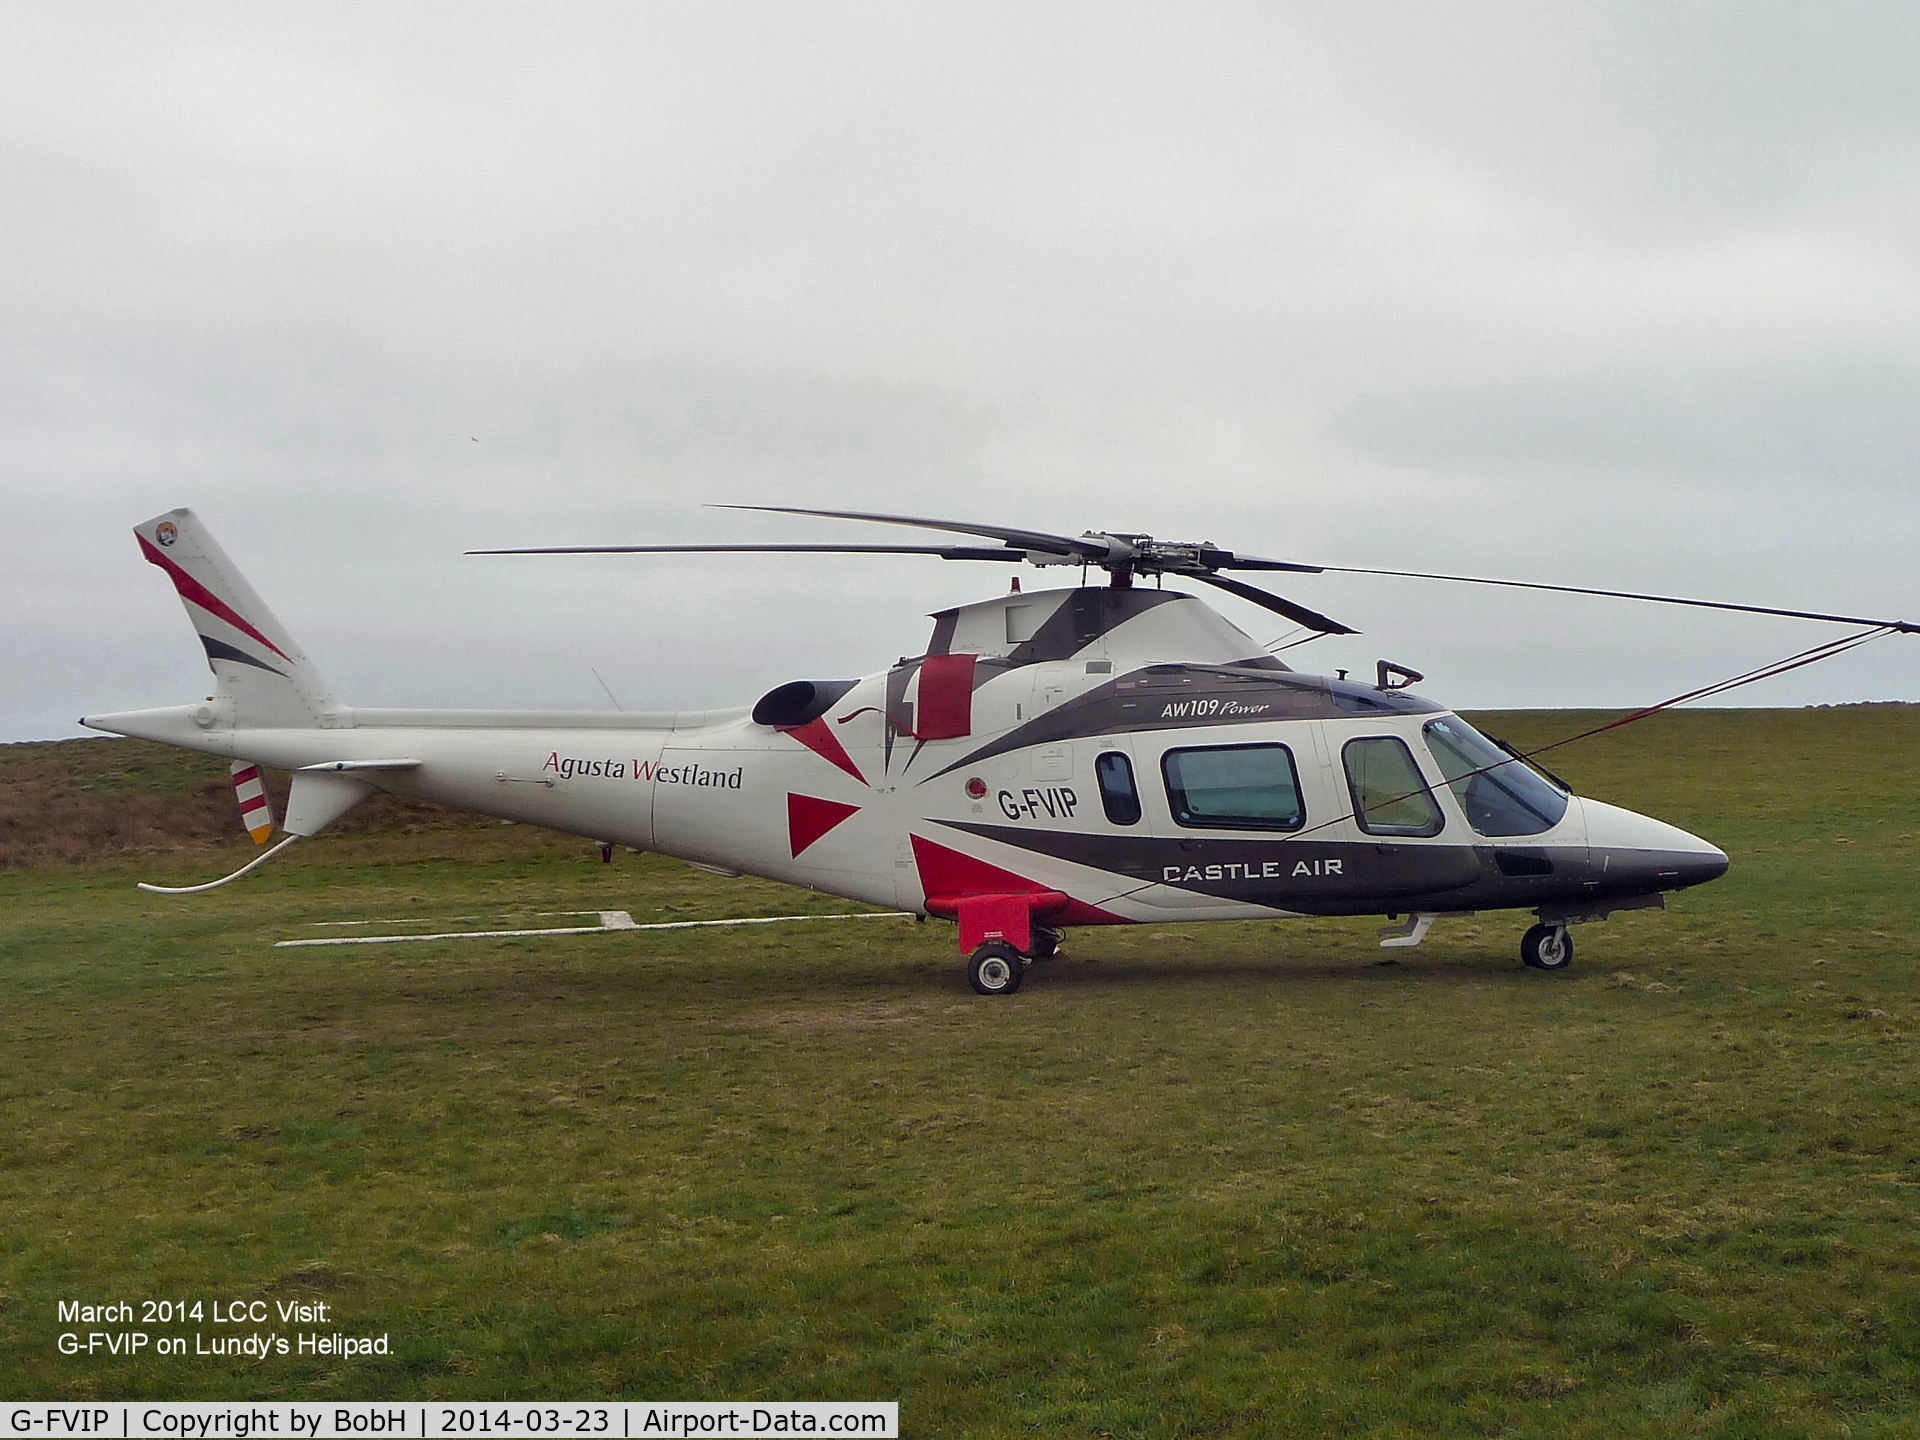 G-FVIP, 1997 Agusta A-109E Power C/N 11011, On Lundy Island, Bristol Channel where it carried a BBC TV team for filming a program on the Island.